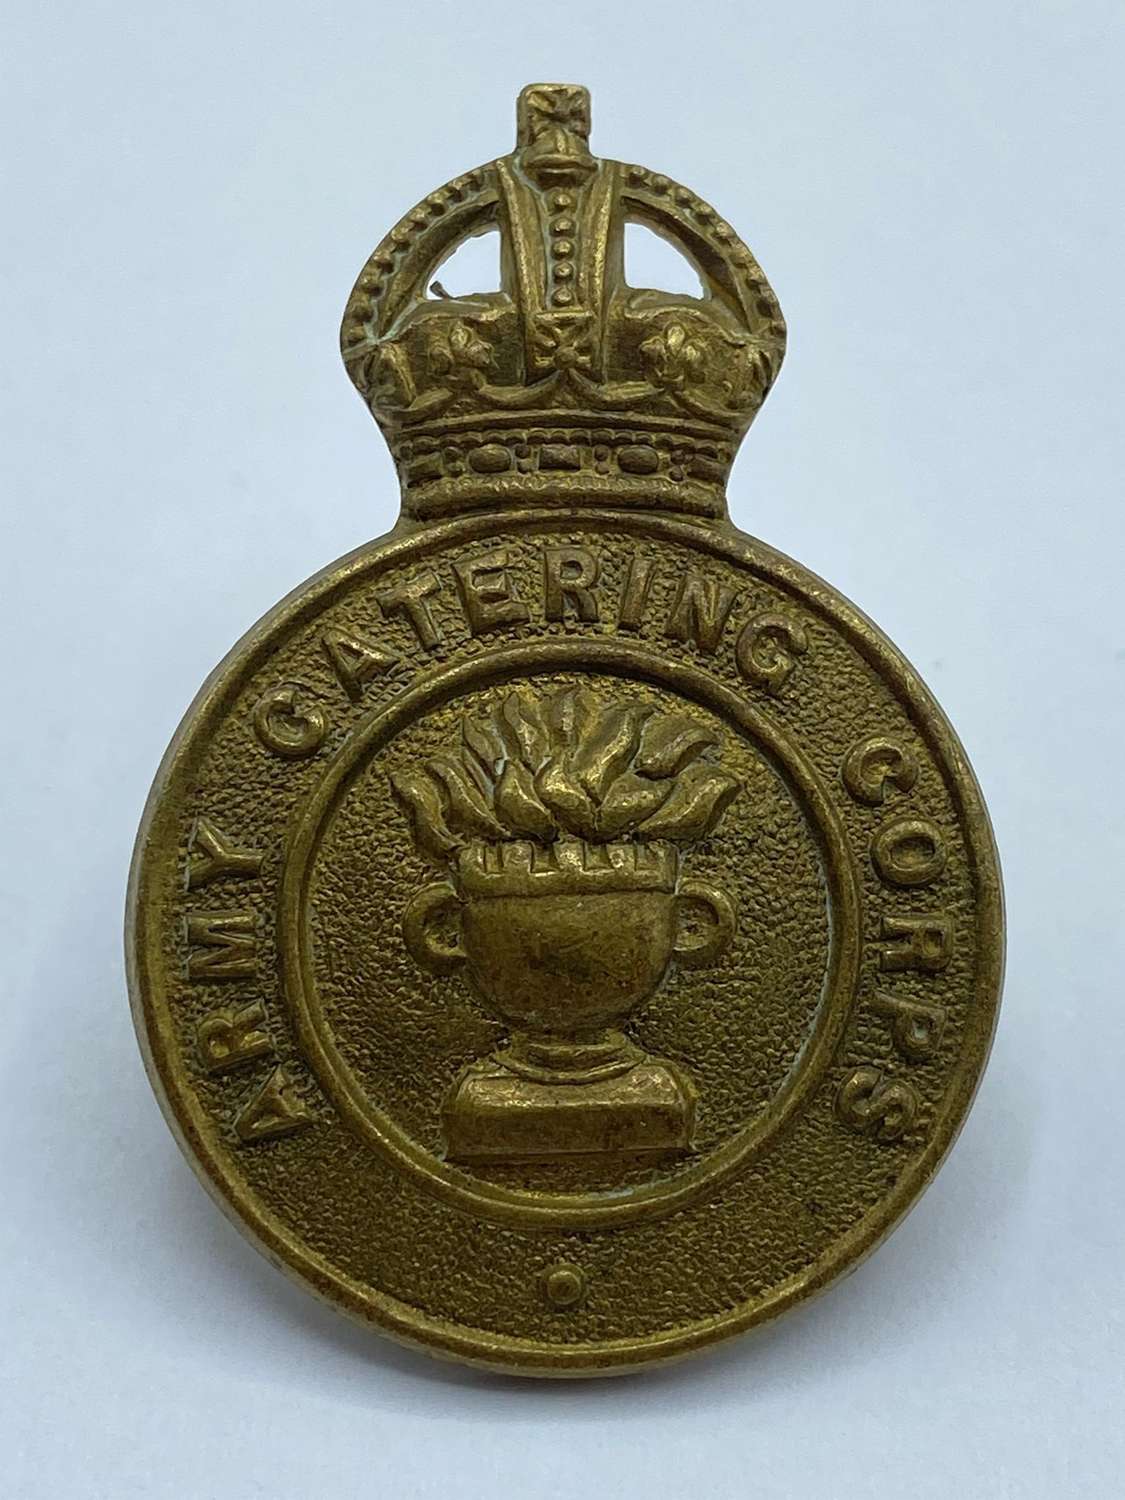 WW2 British Army Catering Corps Cap Badge Features The Kings Crown